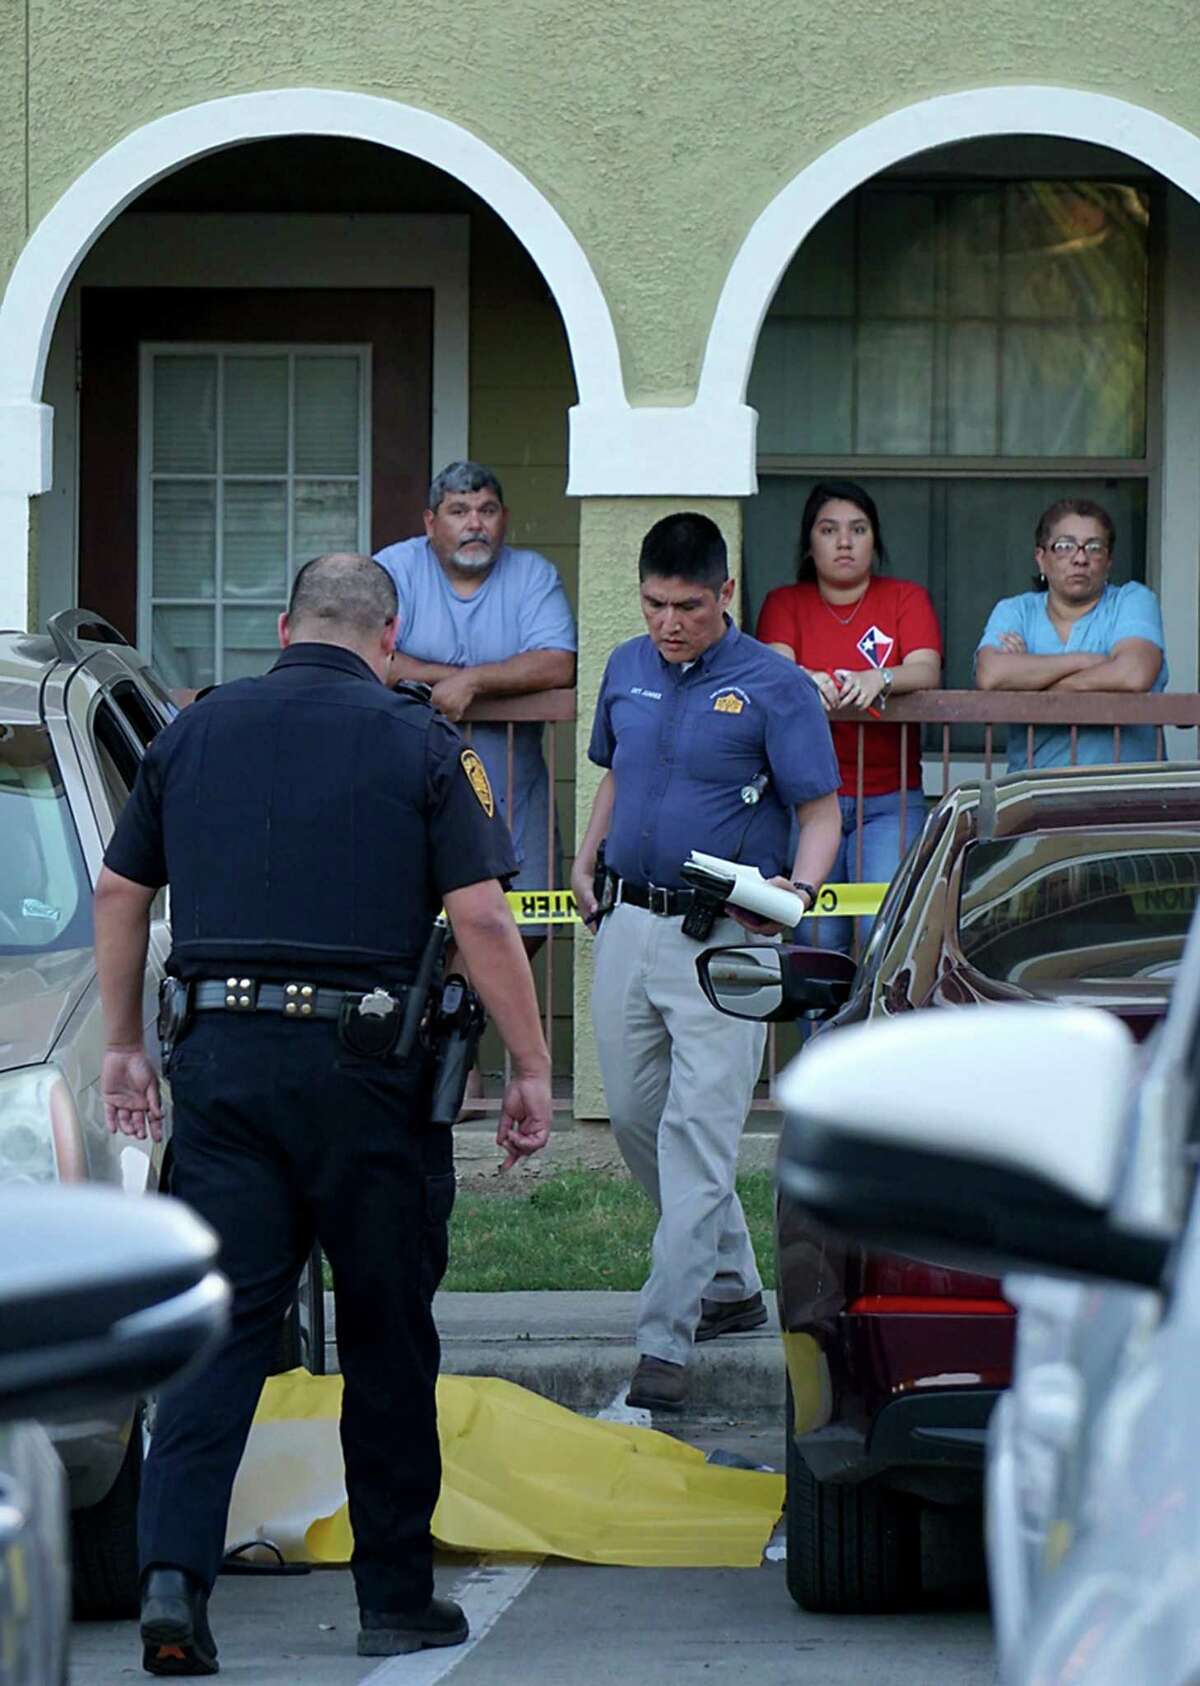 woman was killed Tuesday afternoon in a South Side apartment complex and a second woman is in critical condition. San Antonio Police Department Sgt. Roy Miller said the two women were shot at about 7 p.m. in the parking lot of the Rosemont at University Park apartments, 102 Emerald Ash. The suspect, who police say is a juvenile, fled the scene after the shooting. One woman was pronounced dead at the scene and a second was taken to San Antonio Military Medical Center. Miller said both women appear to be in their 30s.